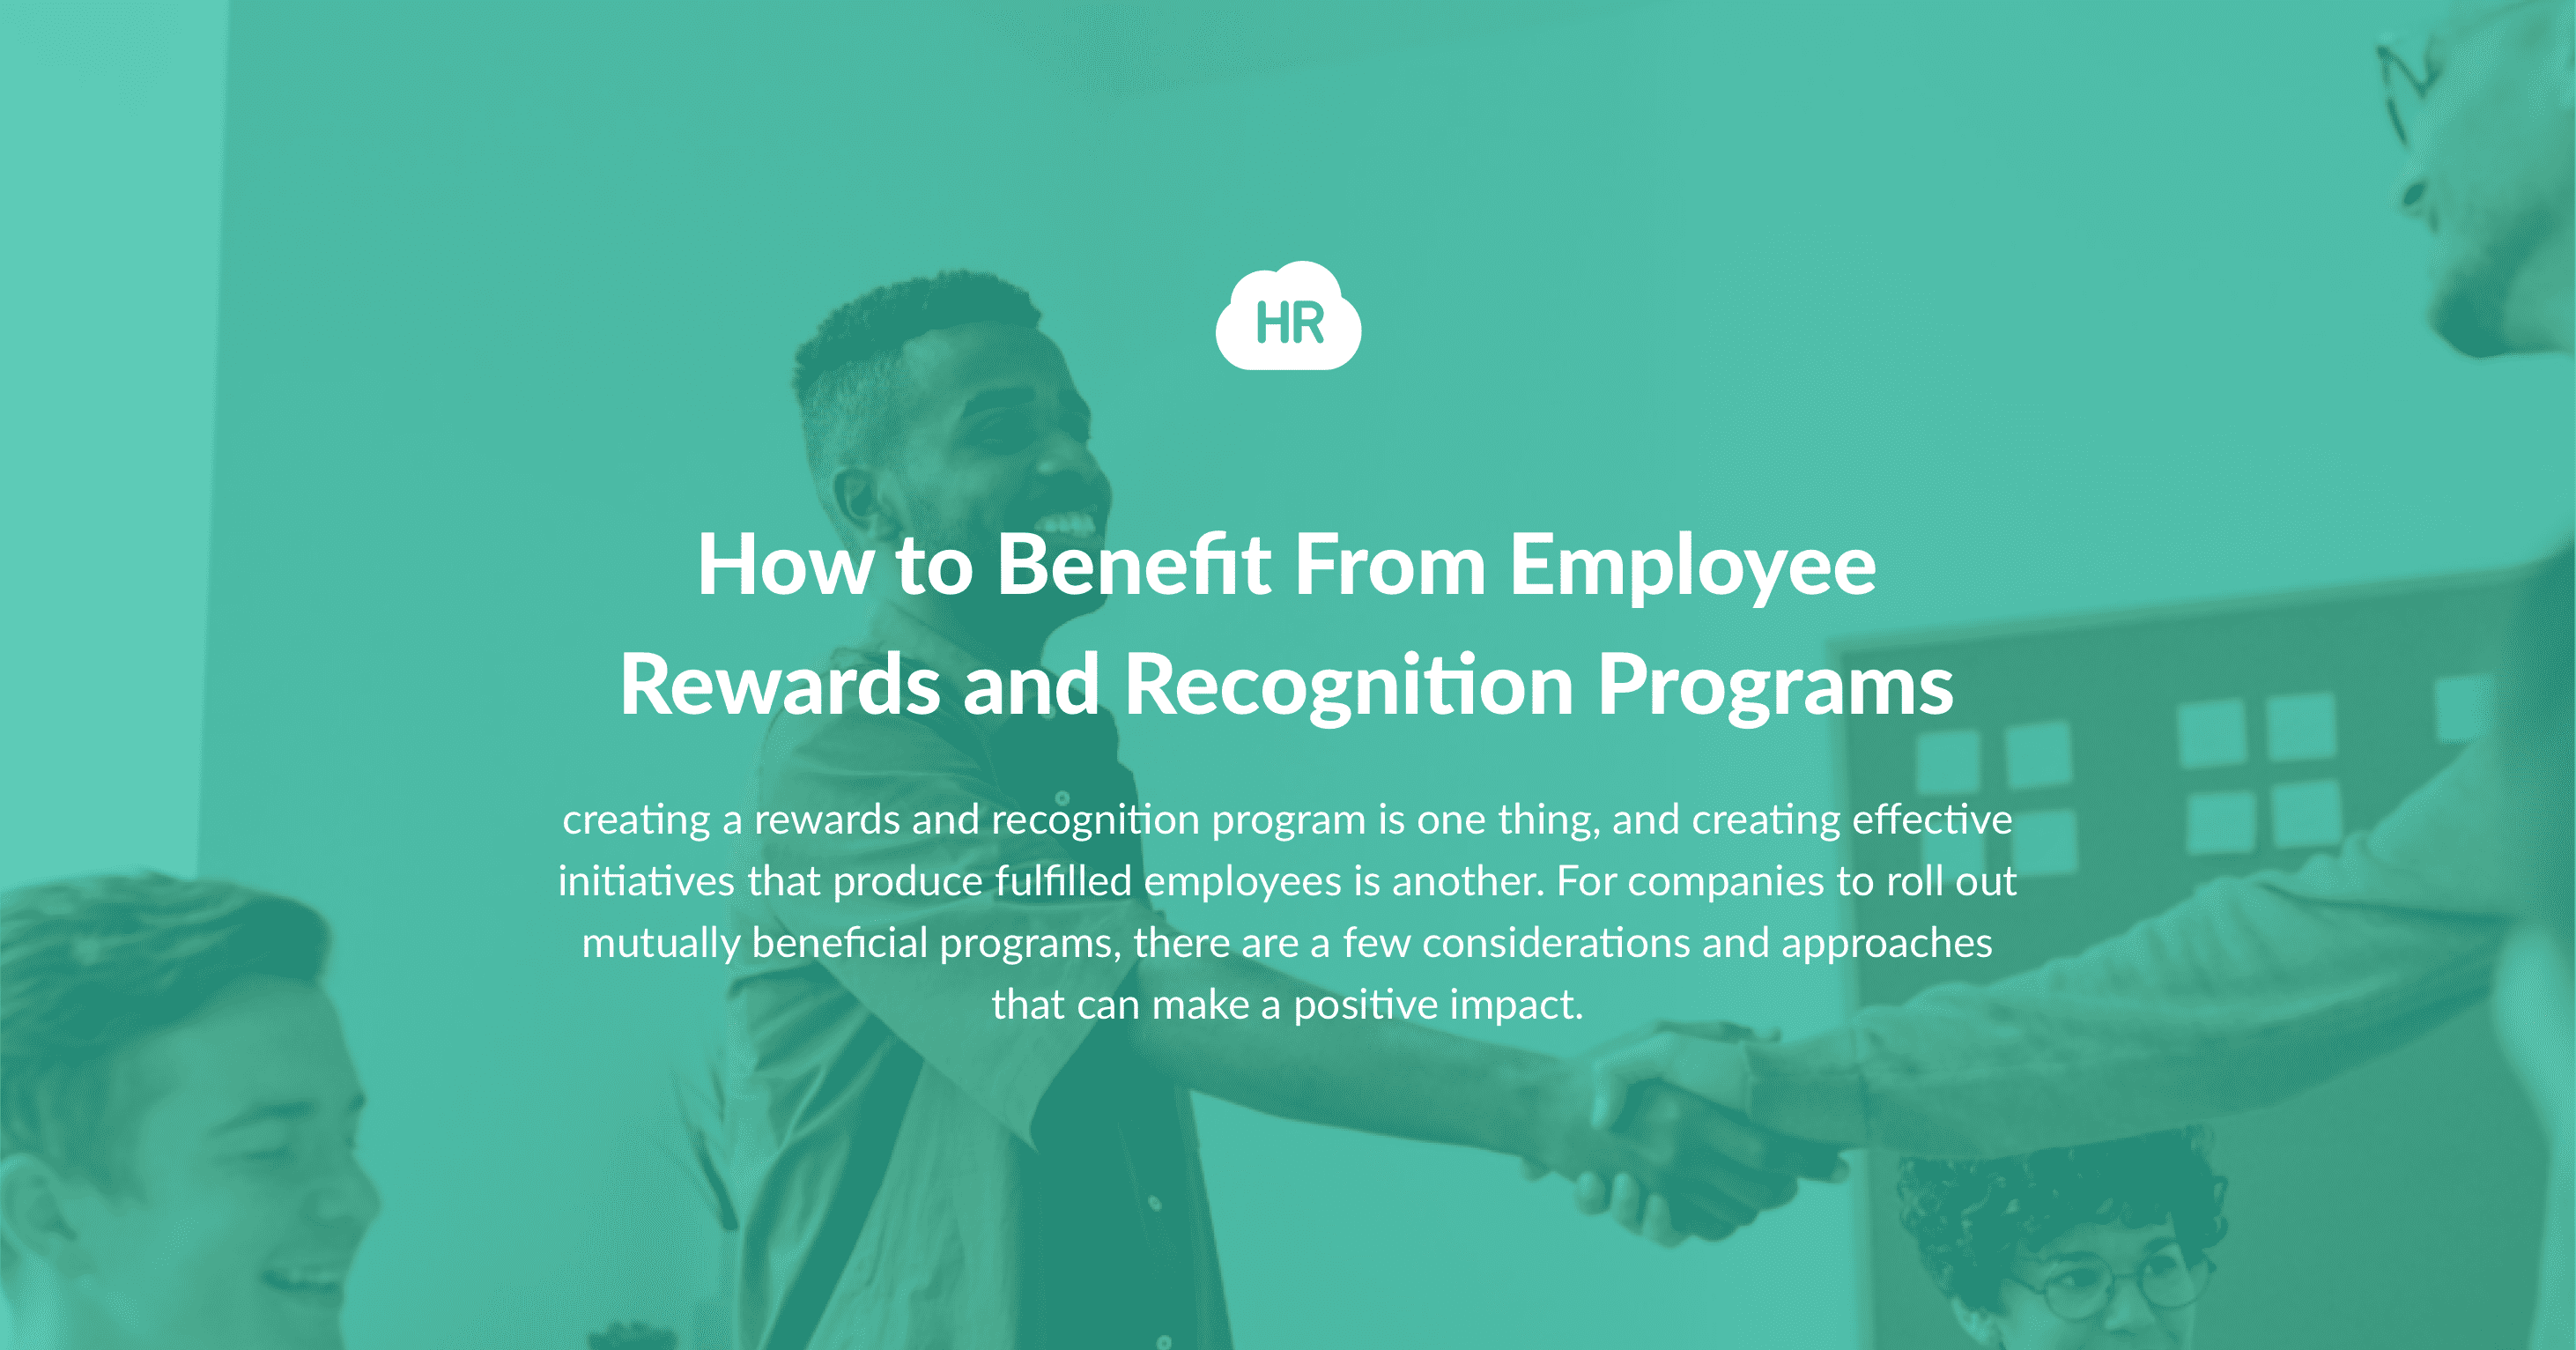 How to Benefit From Employee Rewards and Recognition Programs